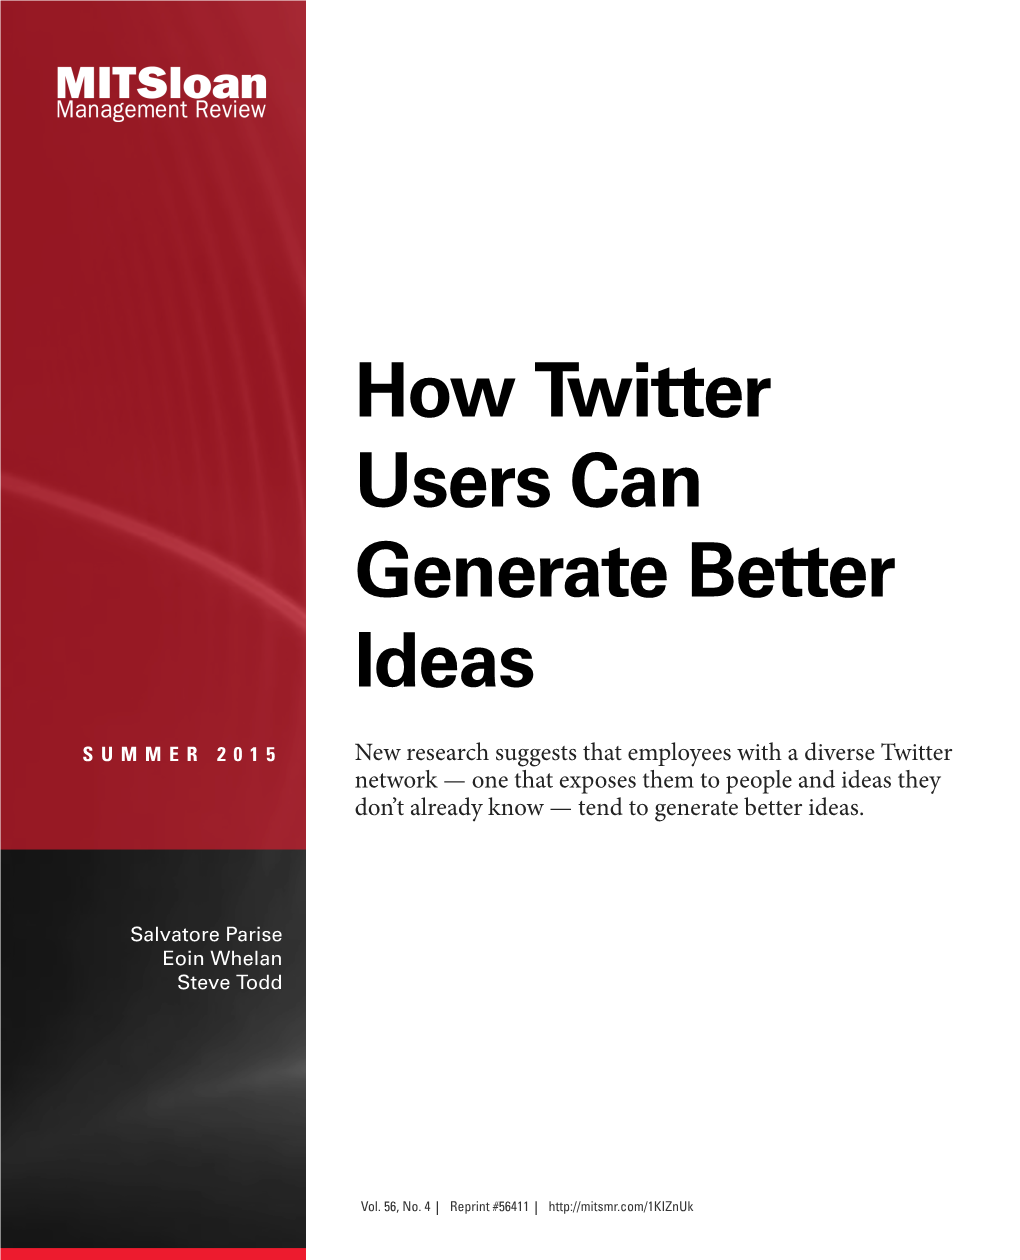 How Twitter Users Can Generate Better Ideas